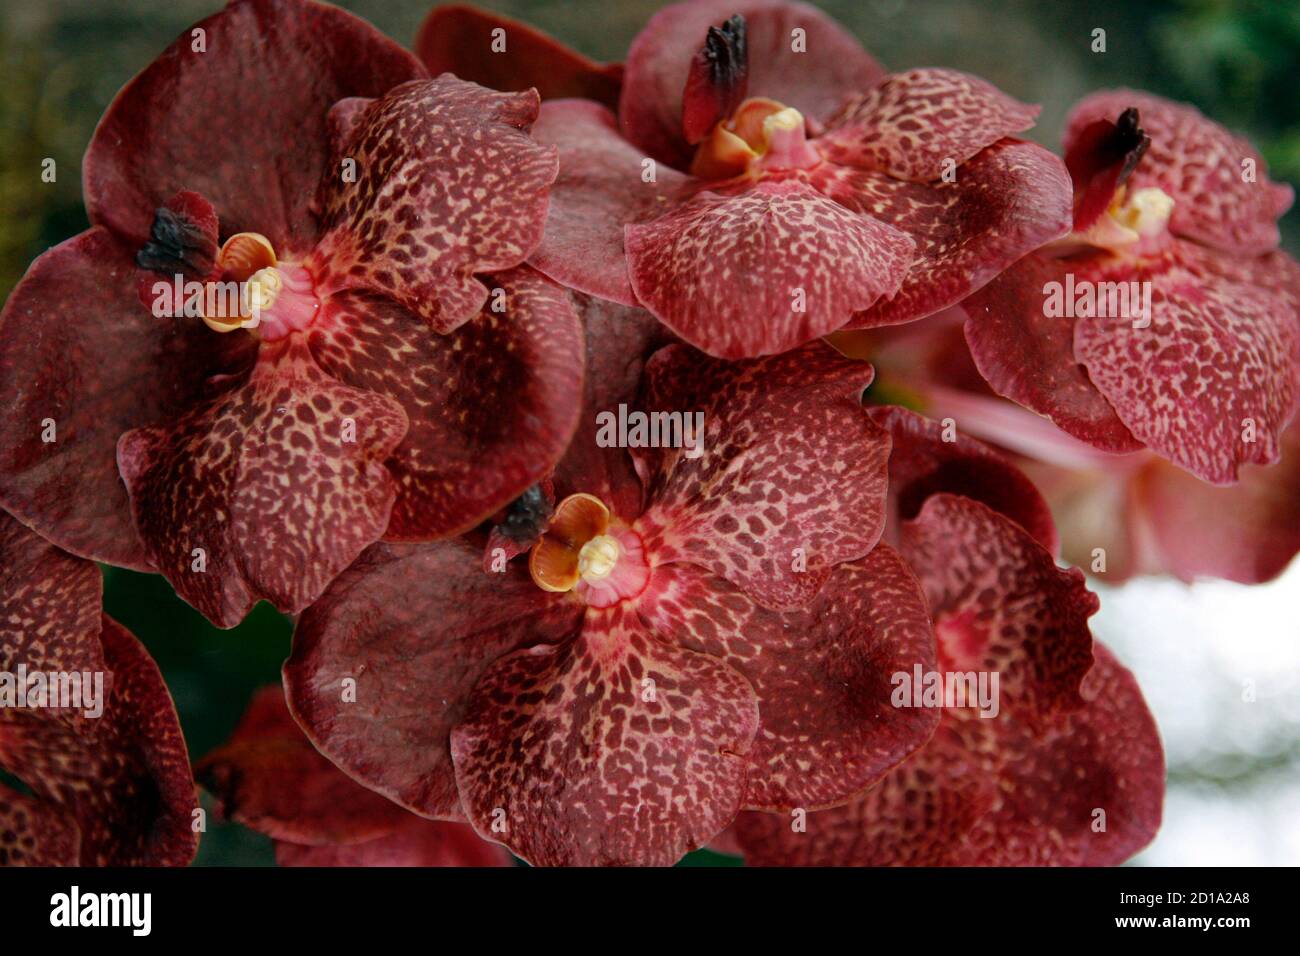 A Ascda Crownfox, or Red Baron Orchid, is seen at the Global Orchid Summit in Quito February 6, 2009. REUTERS/Guillermo Granja (ECUADOR) Stock Photo